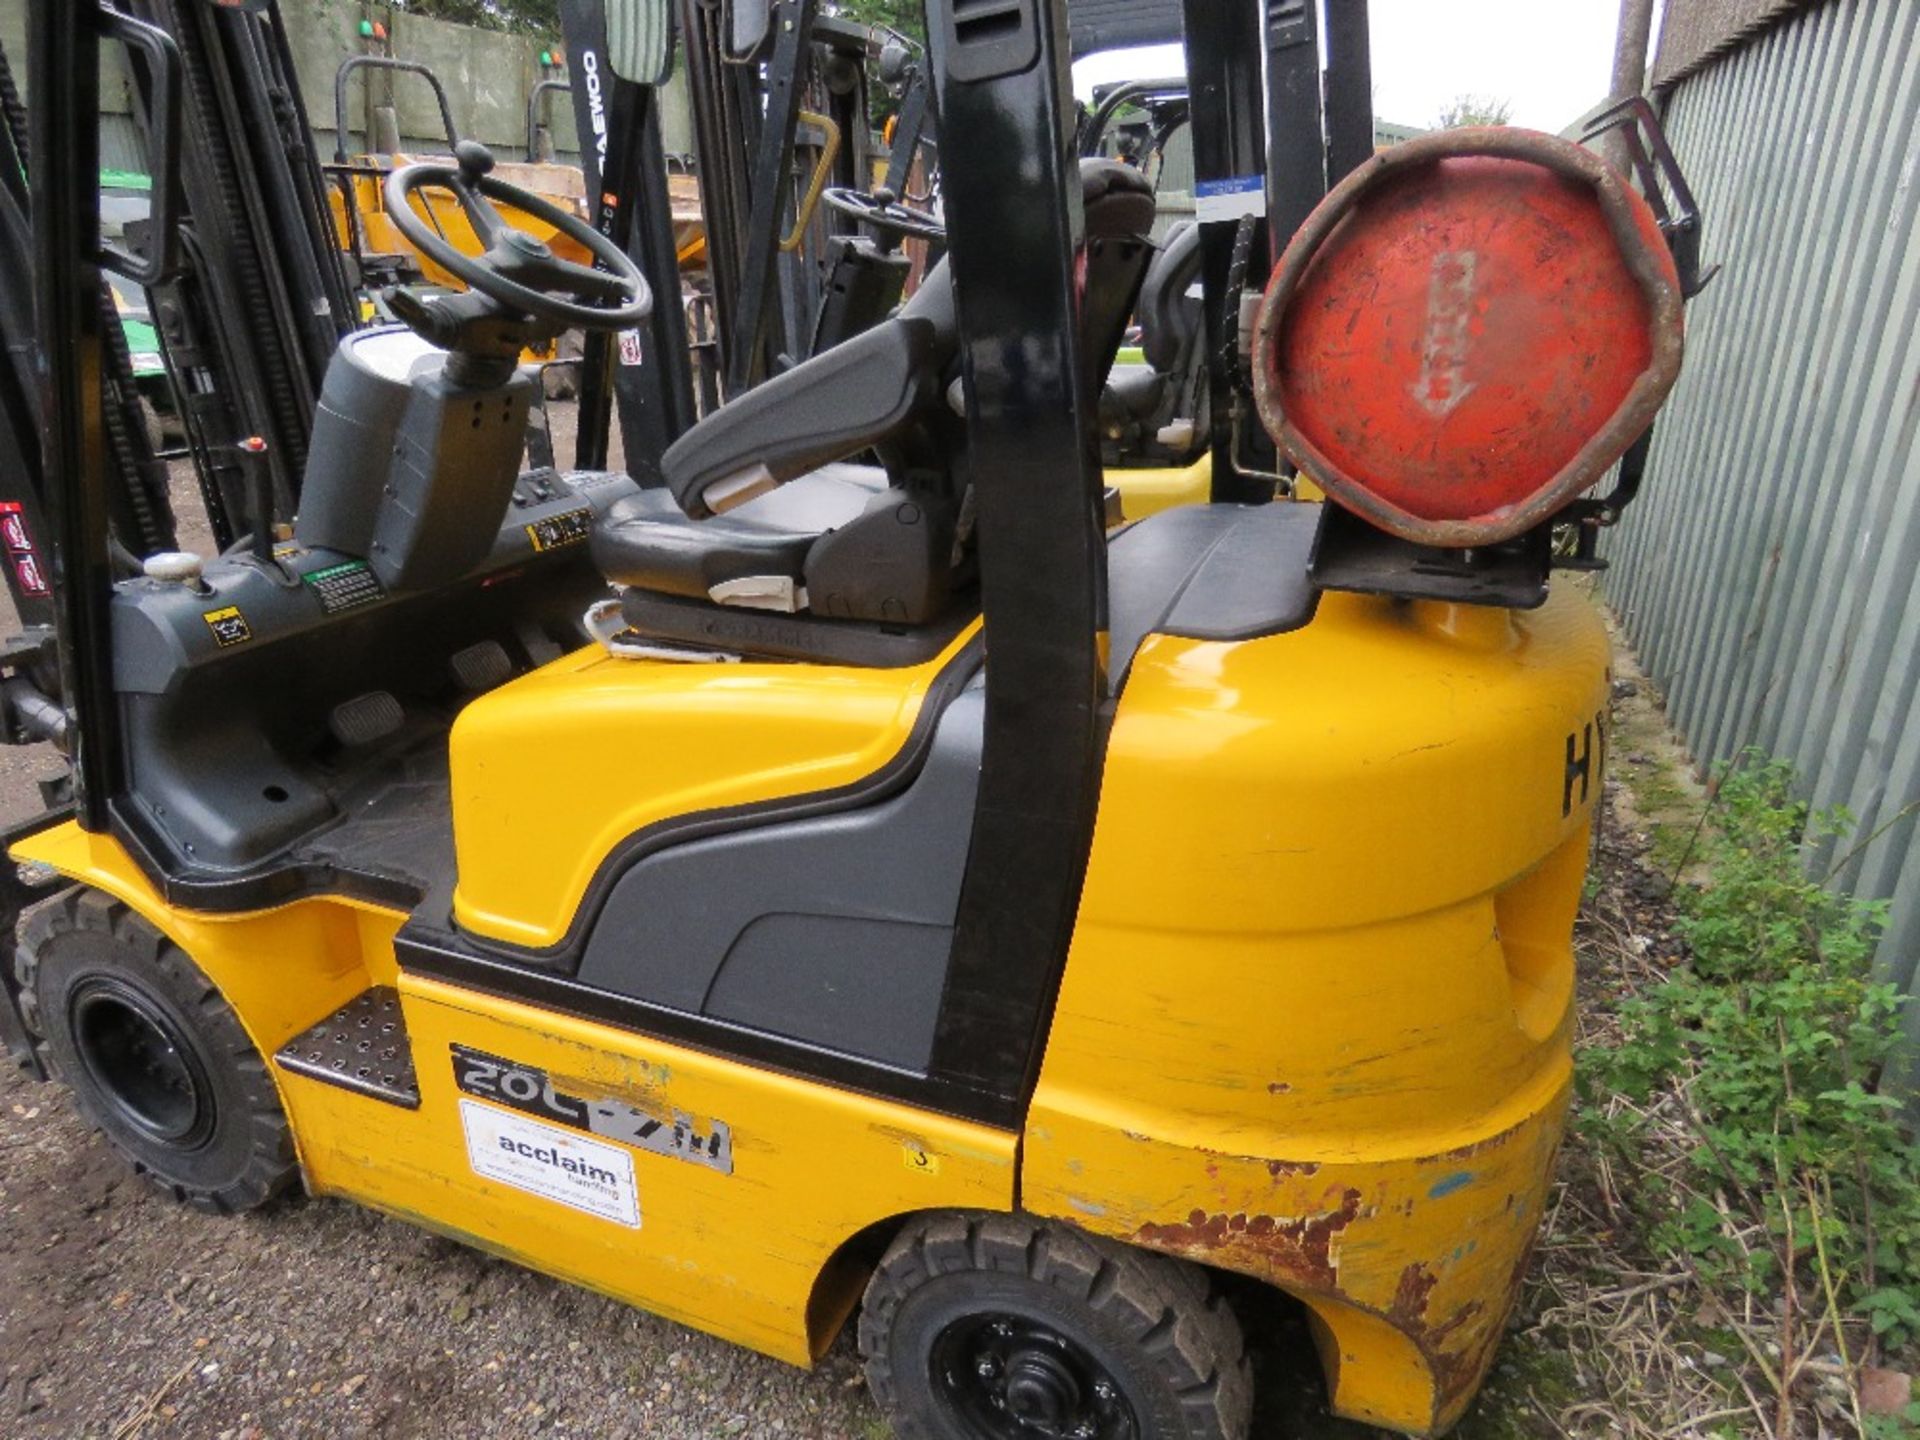 HYUNDAI 20L-7M GAS POWERED FORKLIFT TRUCK, YEAR 2018. 1600 REC HOURS APPROX. EXTRA SERVICE. - Image 5 of 11